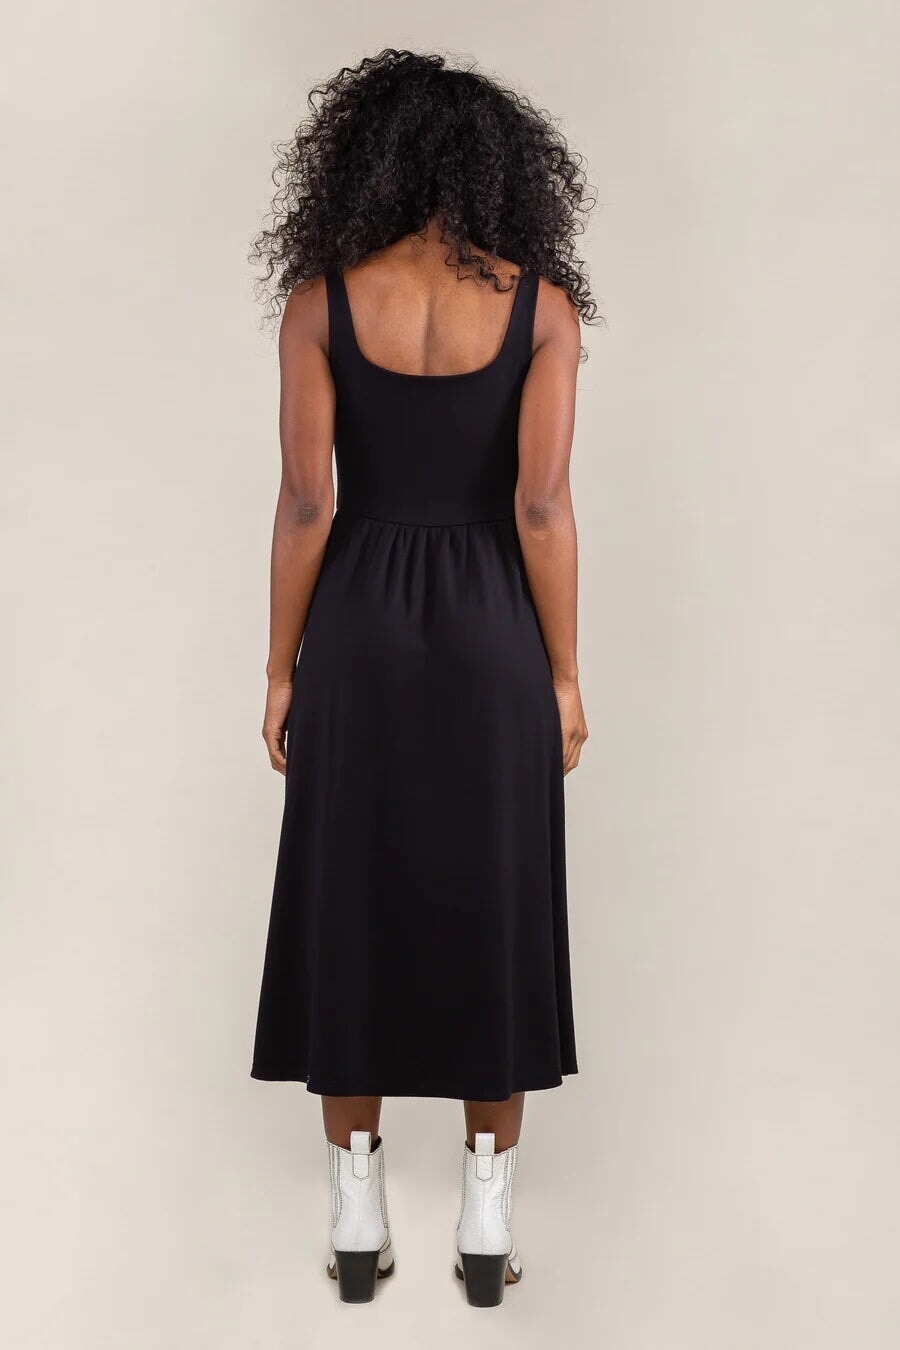 Tomo Arches Dress in Black dress No Less Than 